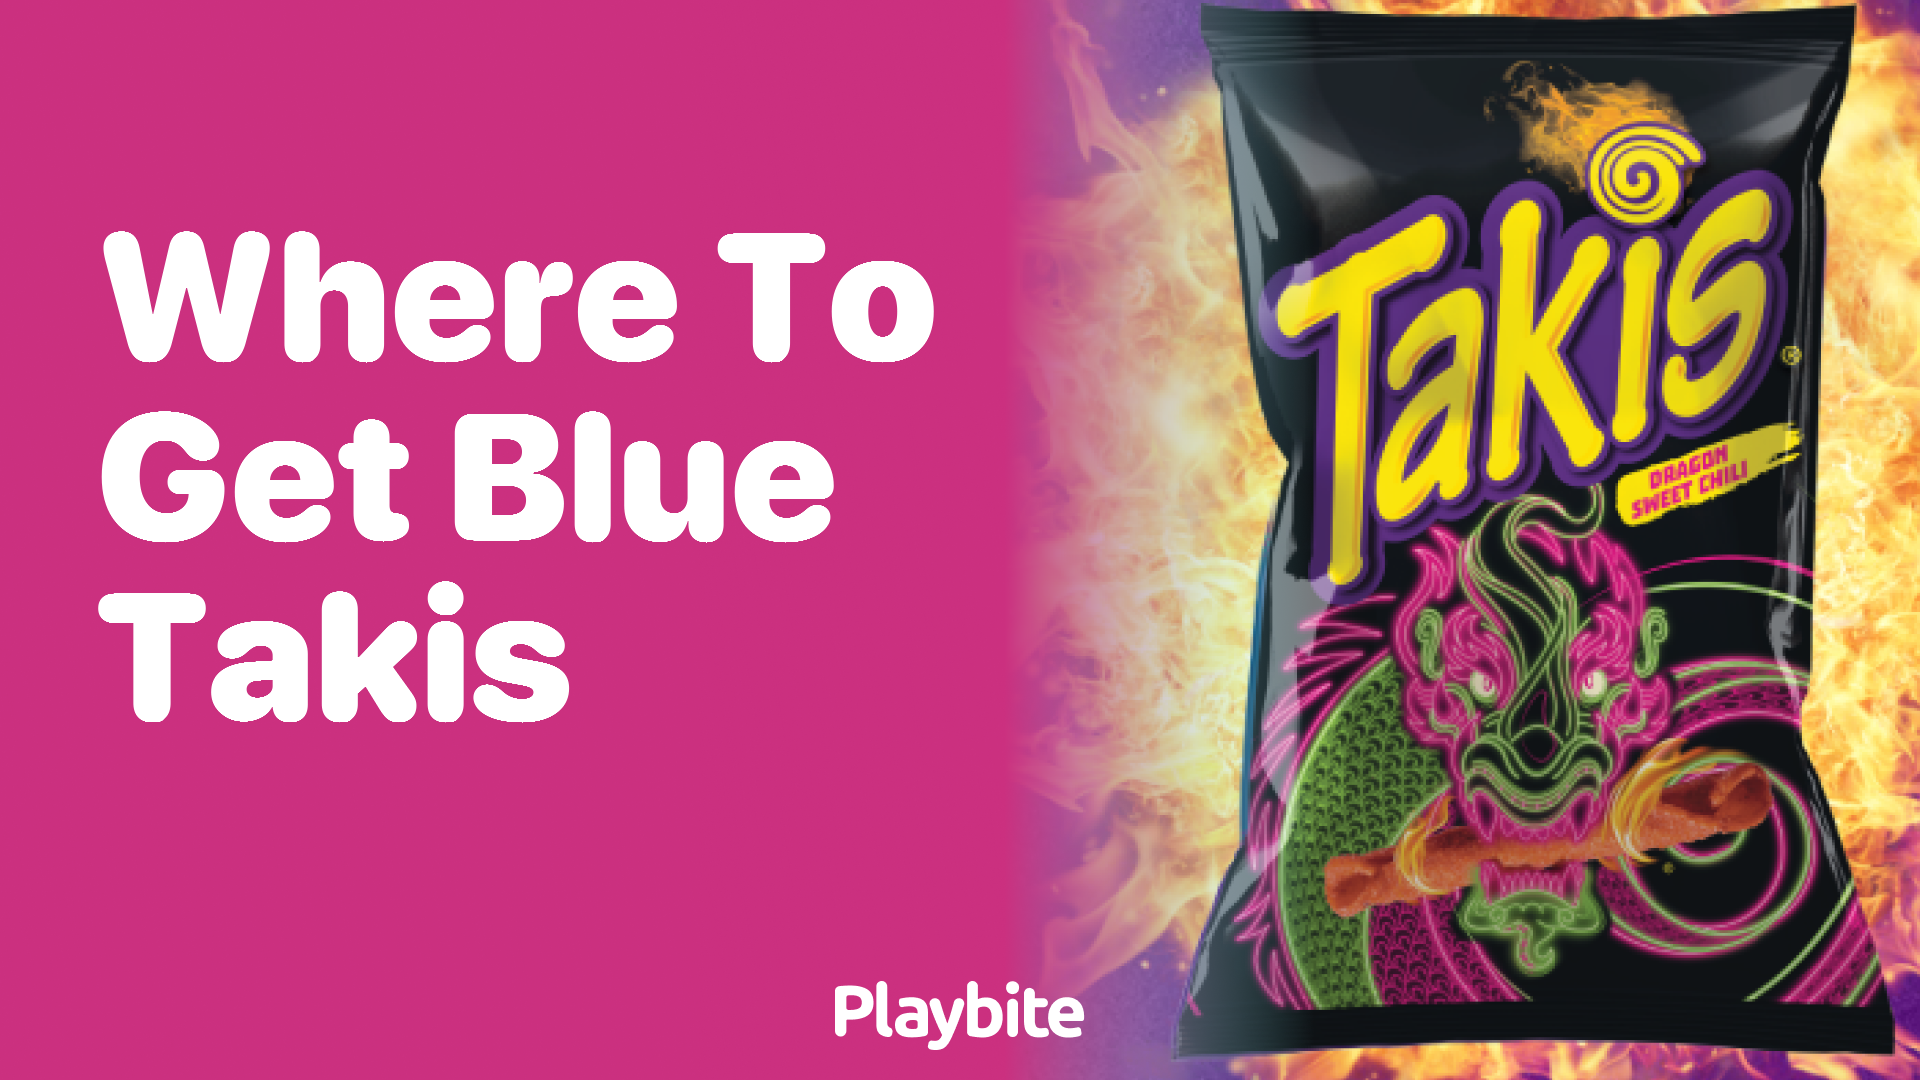 Where to Get Blue Takis and Spice Up Your Snack Time